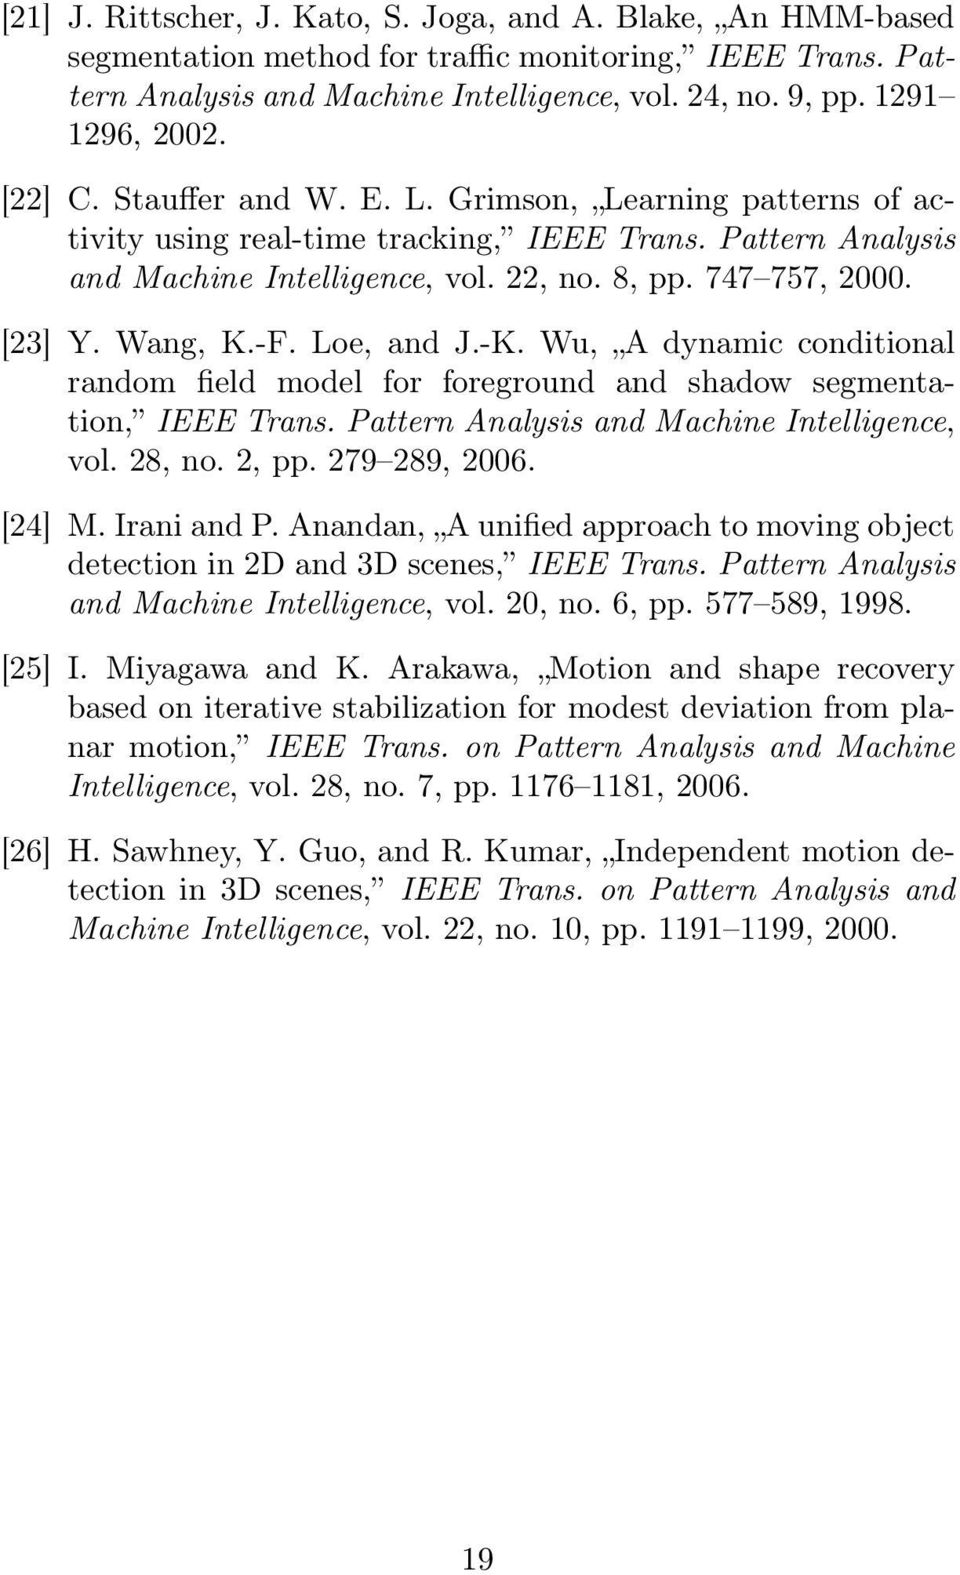 Wang, K.-F. Loe, and J.-K. Wu, A dynamic conditional random field model for foreground and shadow segmentation, IEEE Trans. Pattern Analysis and Machine Intelligence, vol. 28, no. 2, pp.